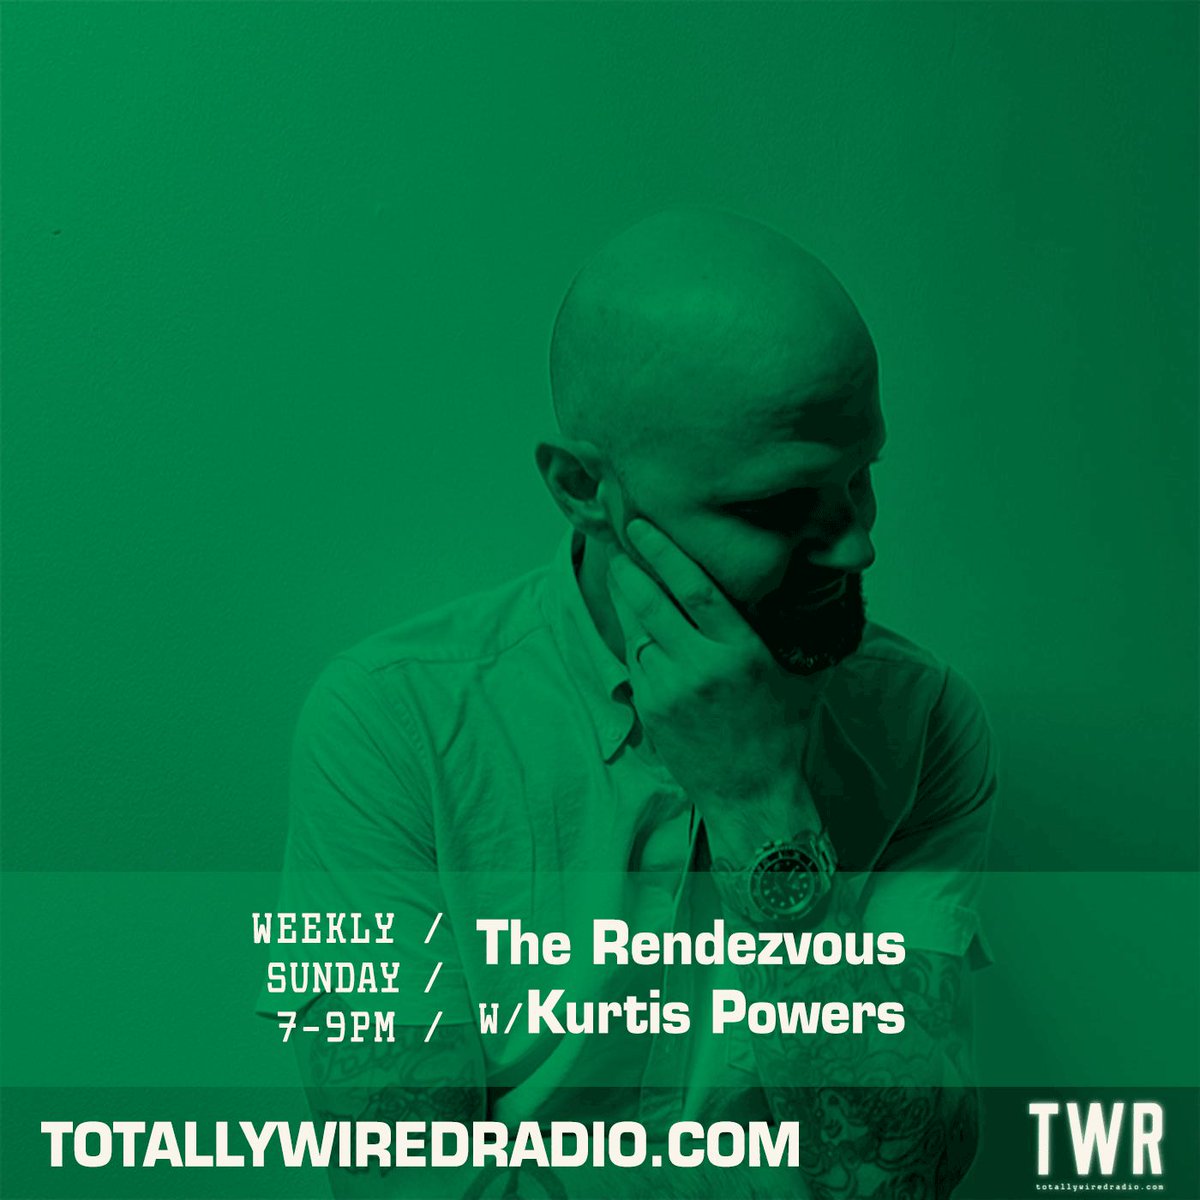 The Rendezvous #live w/ Kurtis Powers #startingsoon on #TotallyWiredRadio Listen @ Link in bio. - #MusicIsLife #London #Brooklyn #NewYork - #Soul #NorthernSoul #CrossoverSoul #Disco #JazzFunk #Boogie